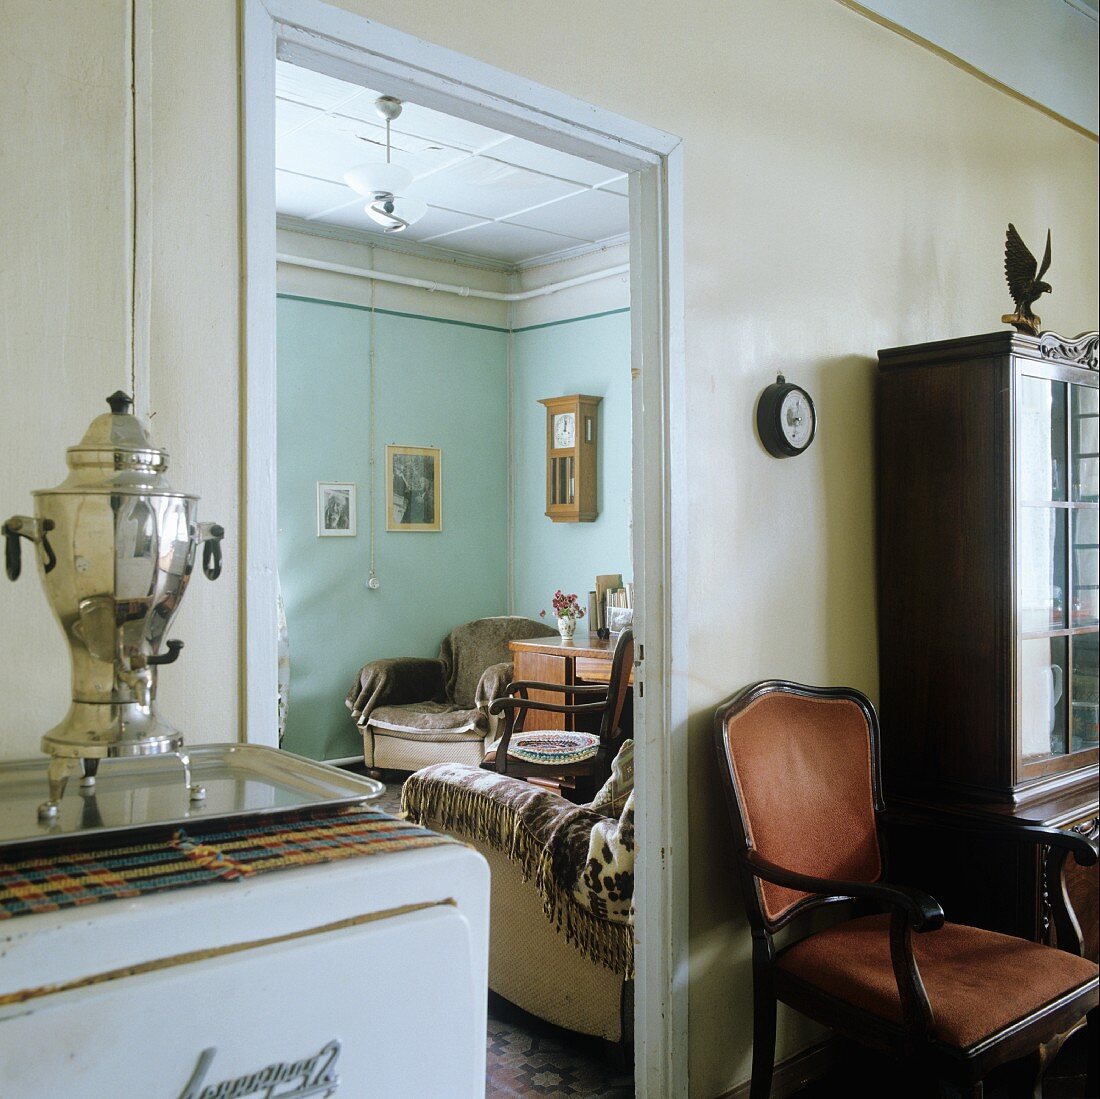 Open doorway with view into living room flanked by samovar on kitchen cupboard and antique armchair in dining room